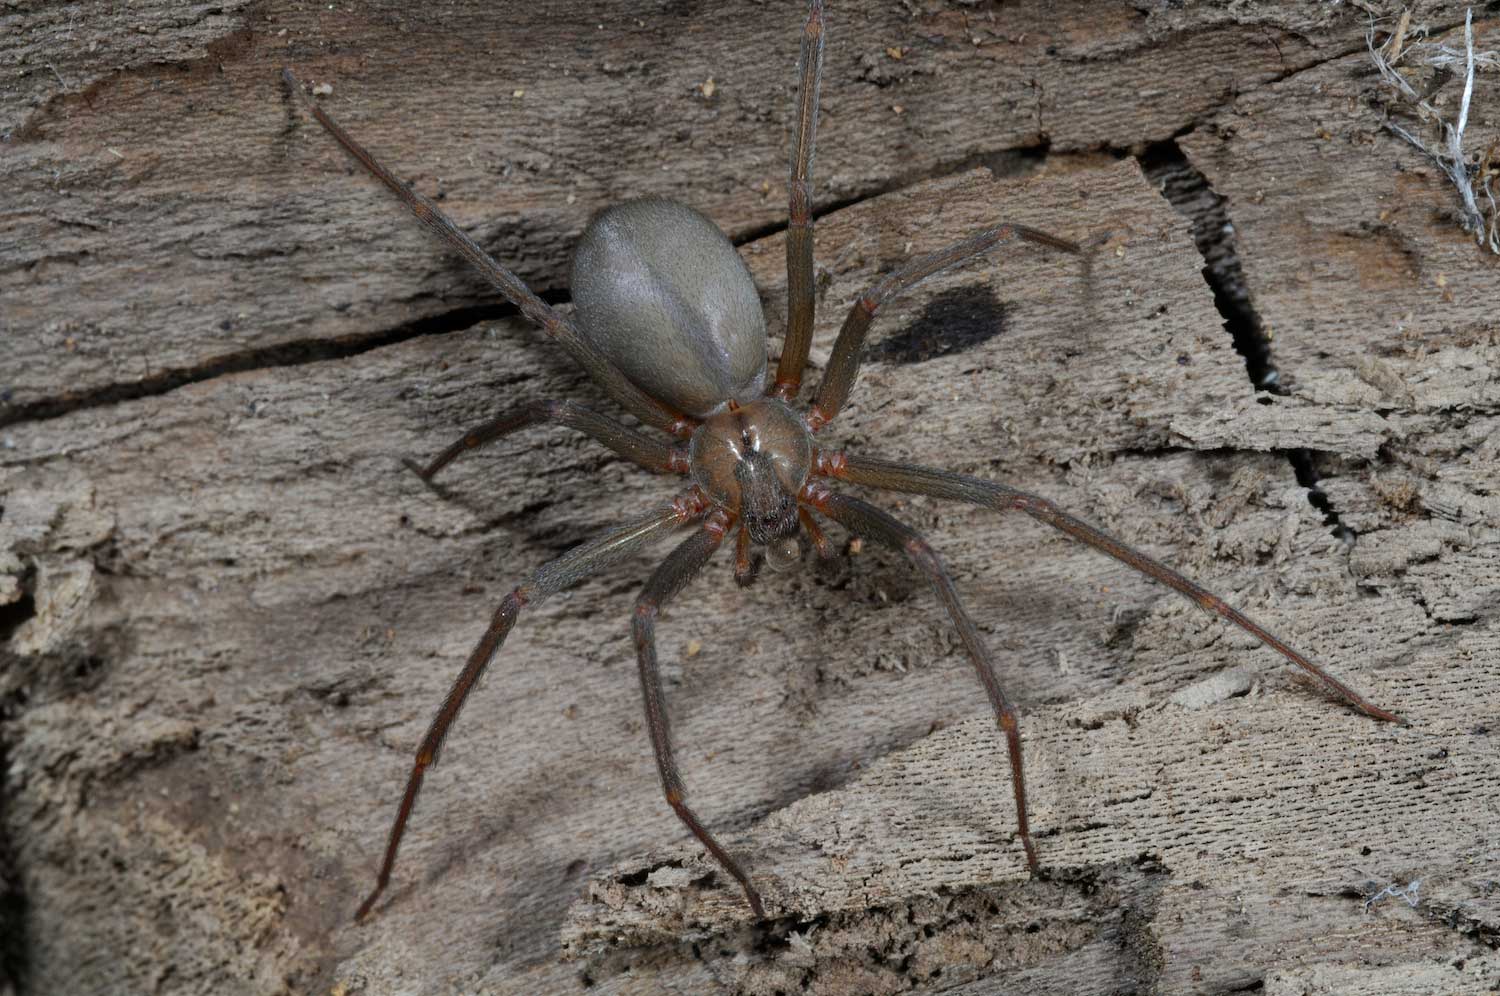 A brown recluse spider.